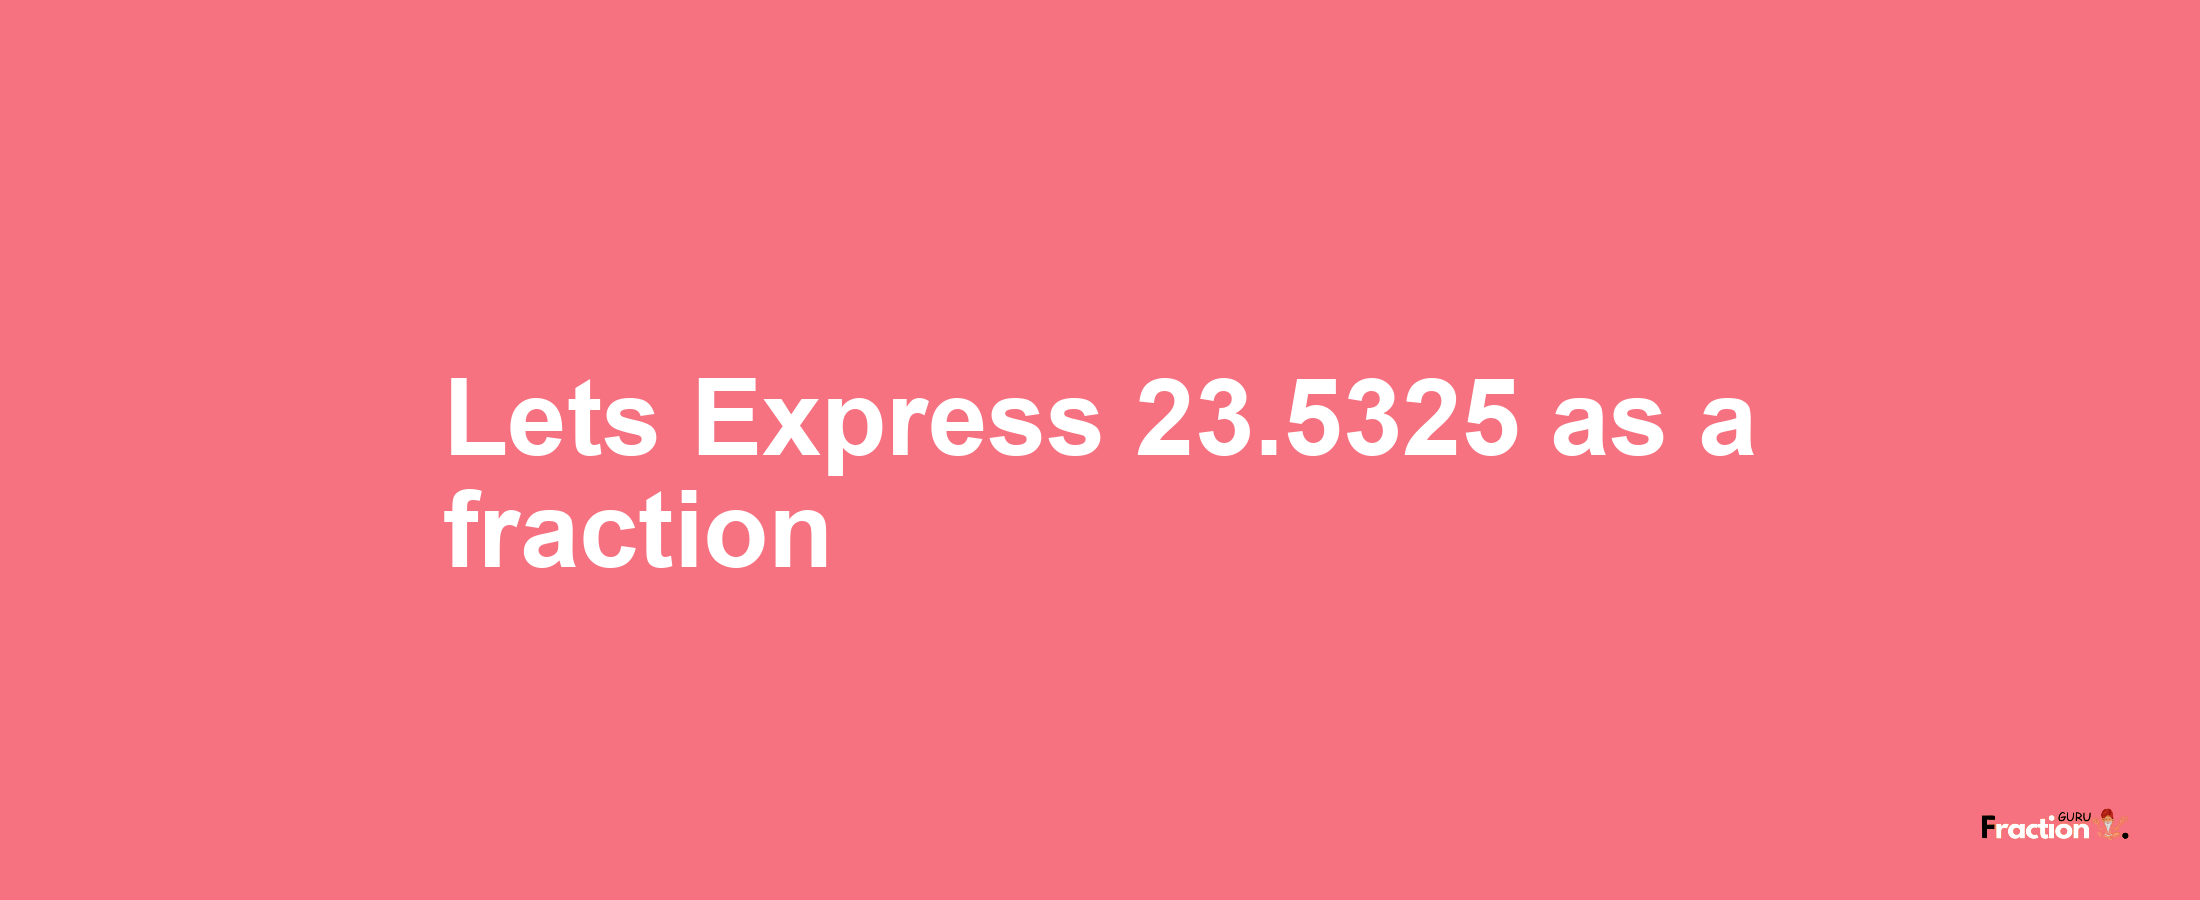 Lets Express 23.5325 as afraction